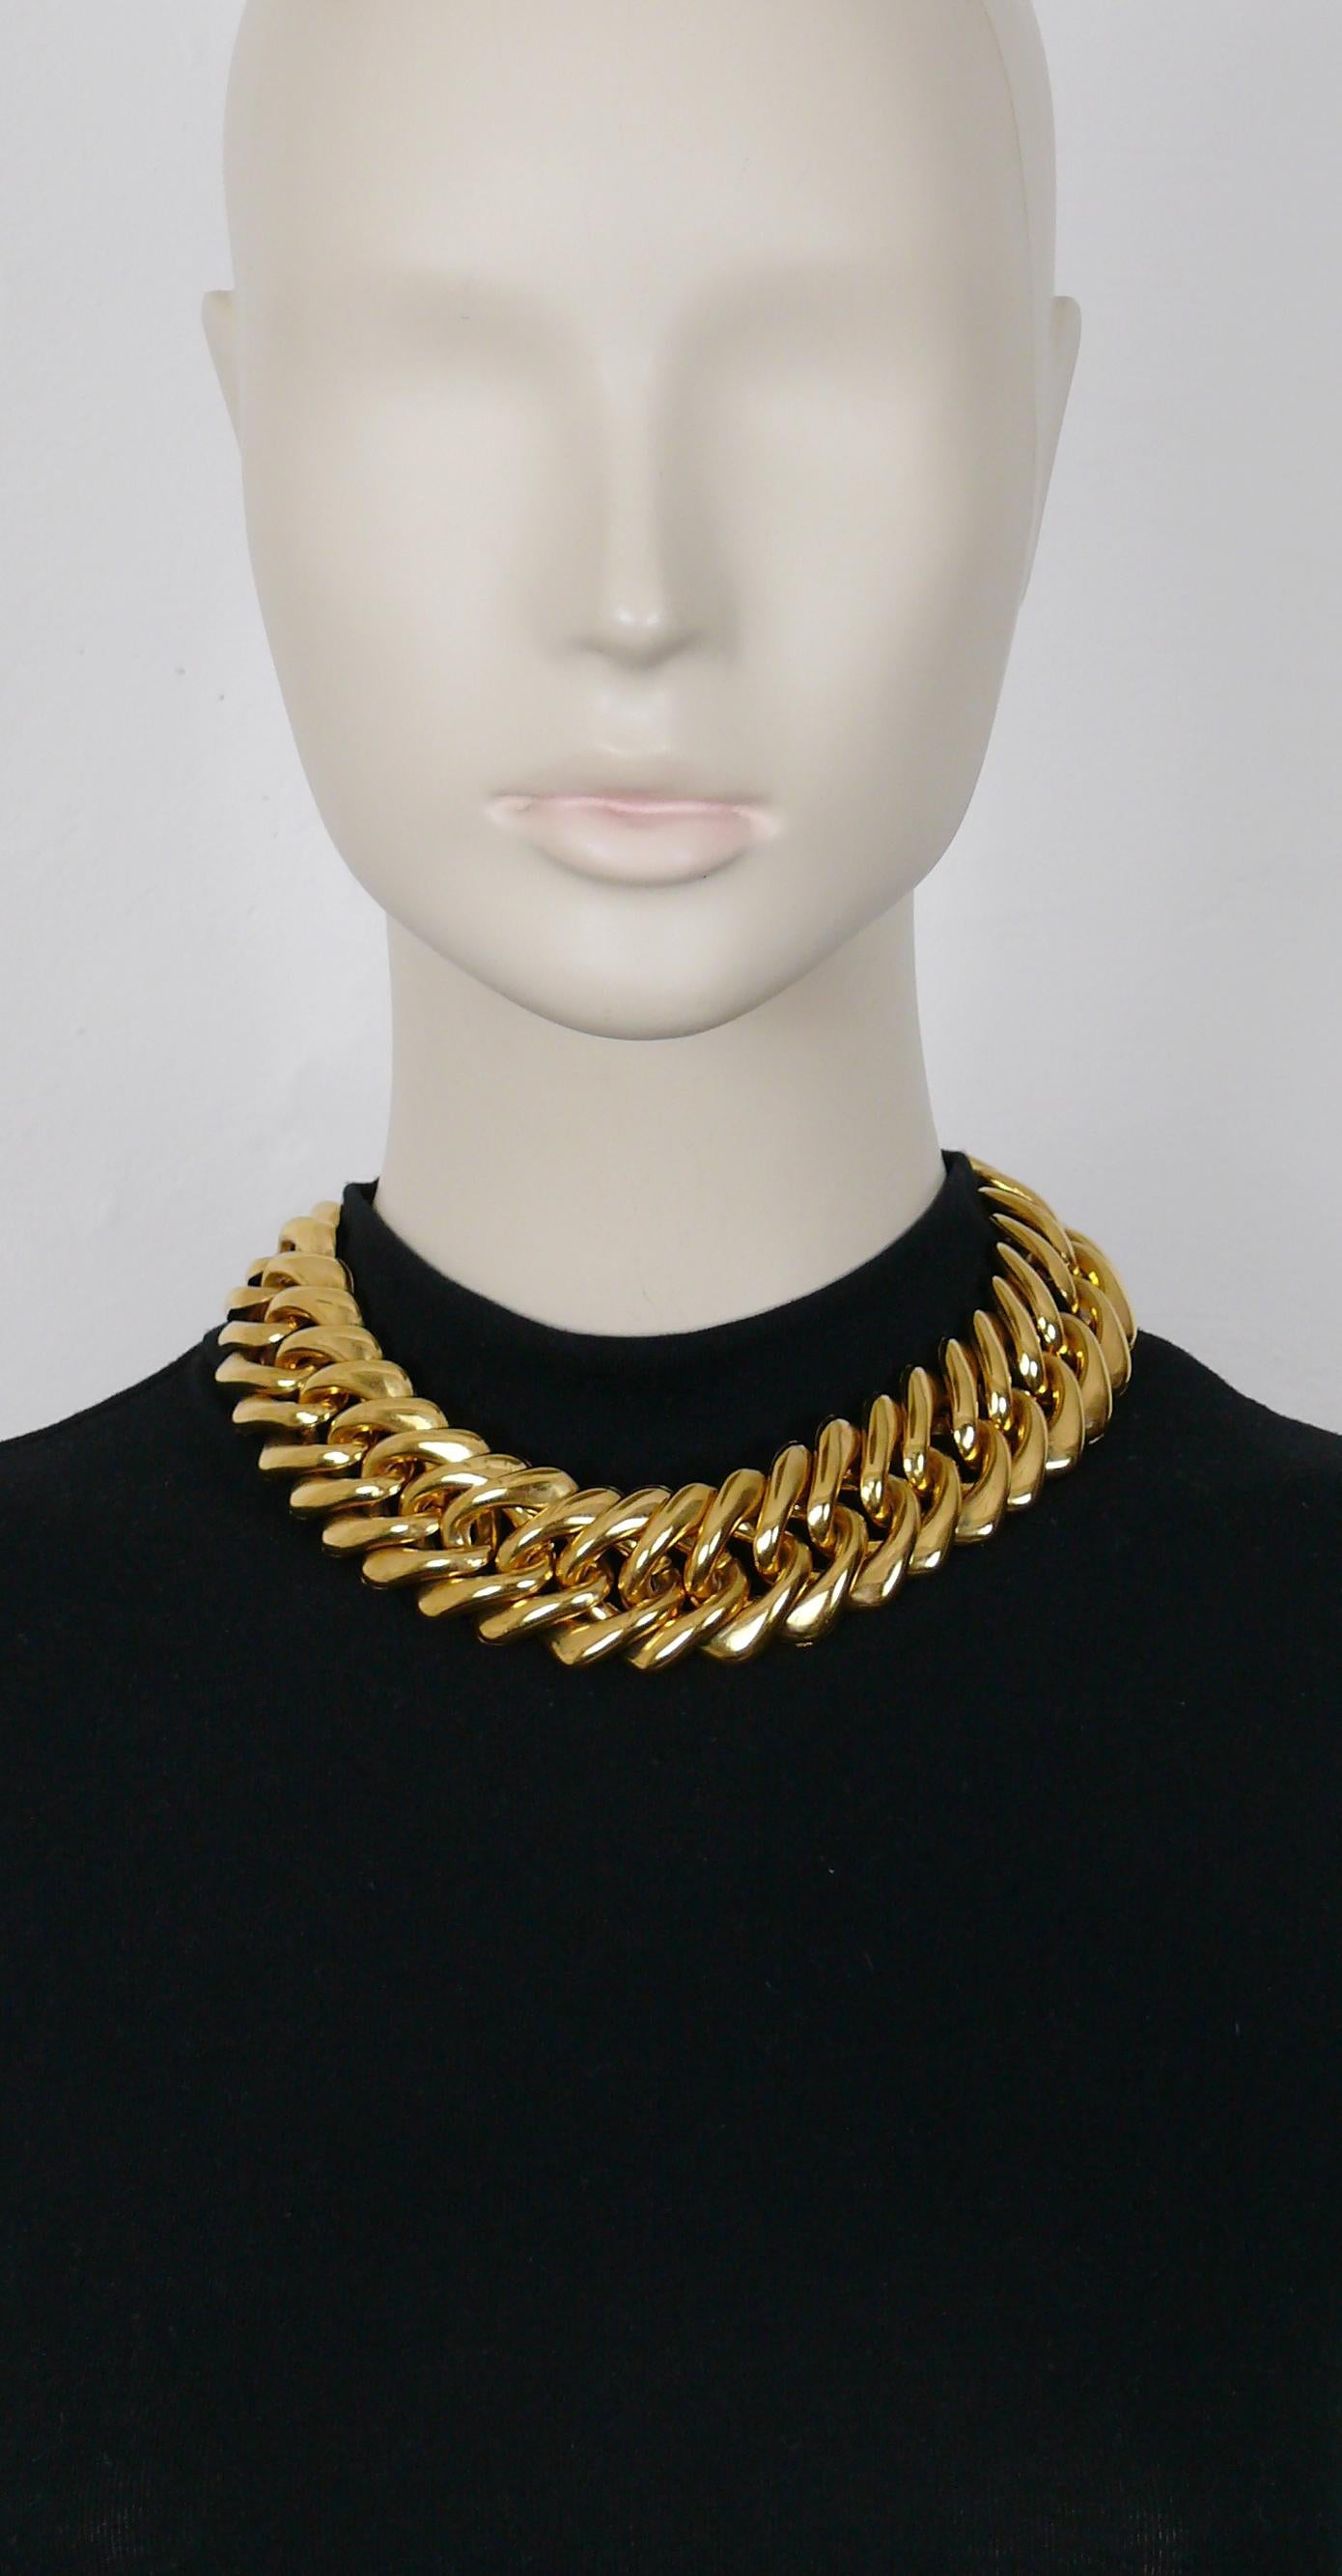 YVES SAINT LAURENT vintage iconic gold toned curb chain necklace.

Hook clasp.

Embossed YSL Made in France.

Indicative measurements : length approx. 42 cm (16.54 inches) / width approx. 3 cm (1.18 inches).

Material : Gold tone metal